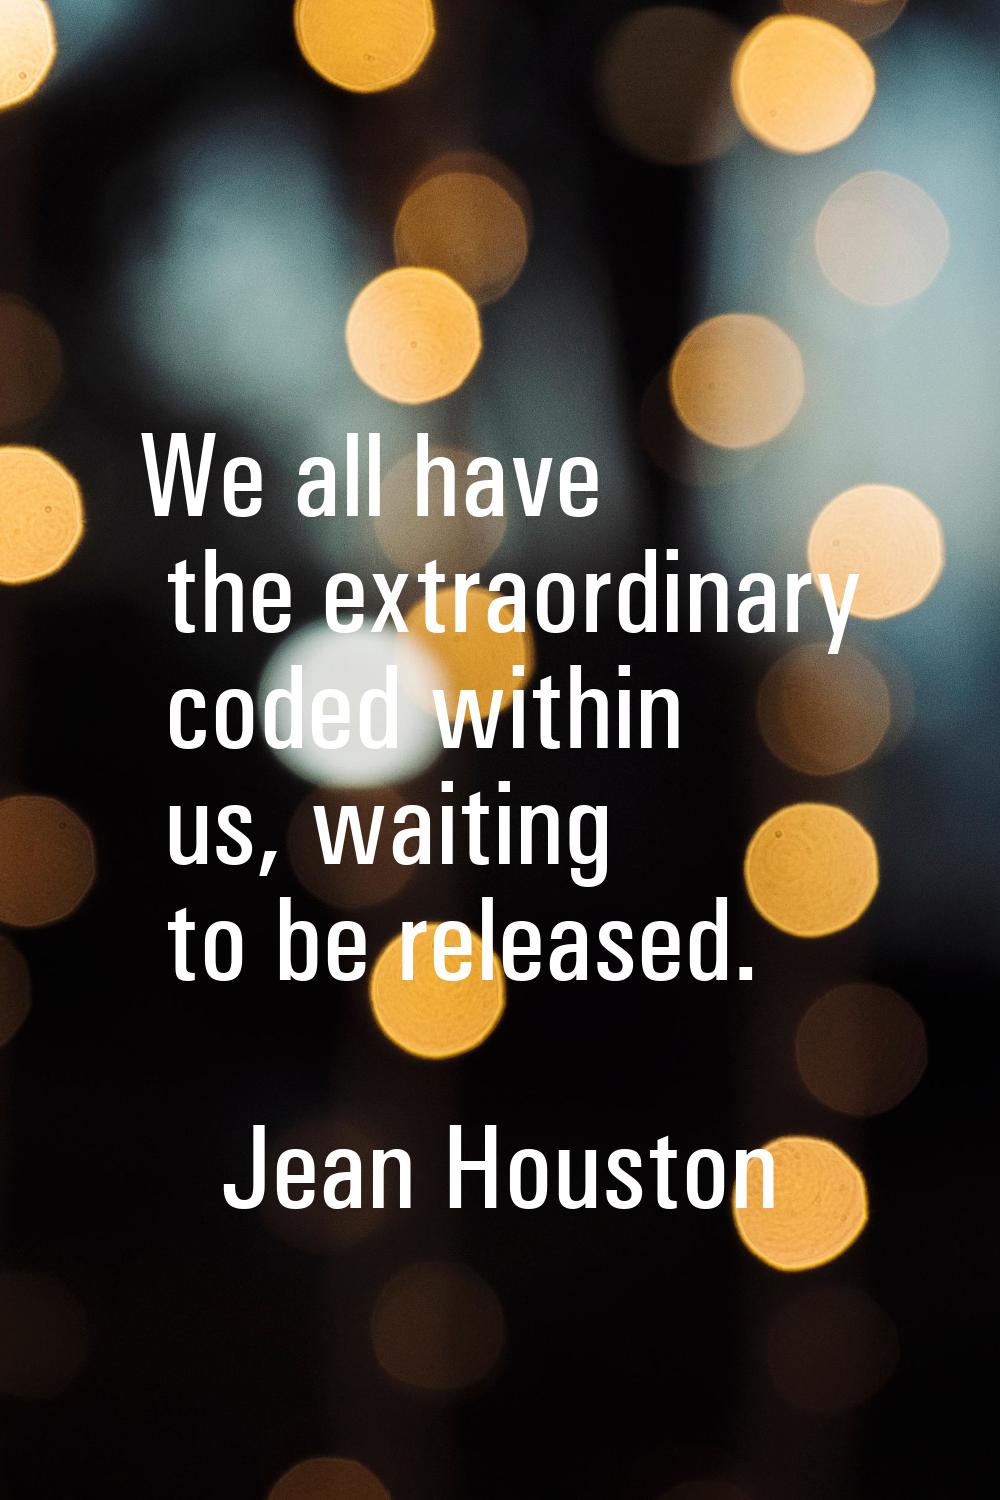 We all have the extraordinary coded within us, waiting to be released.